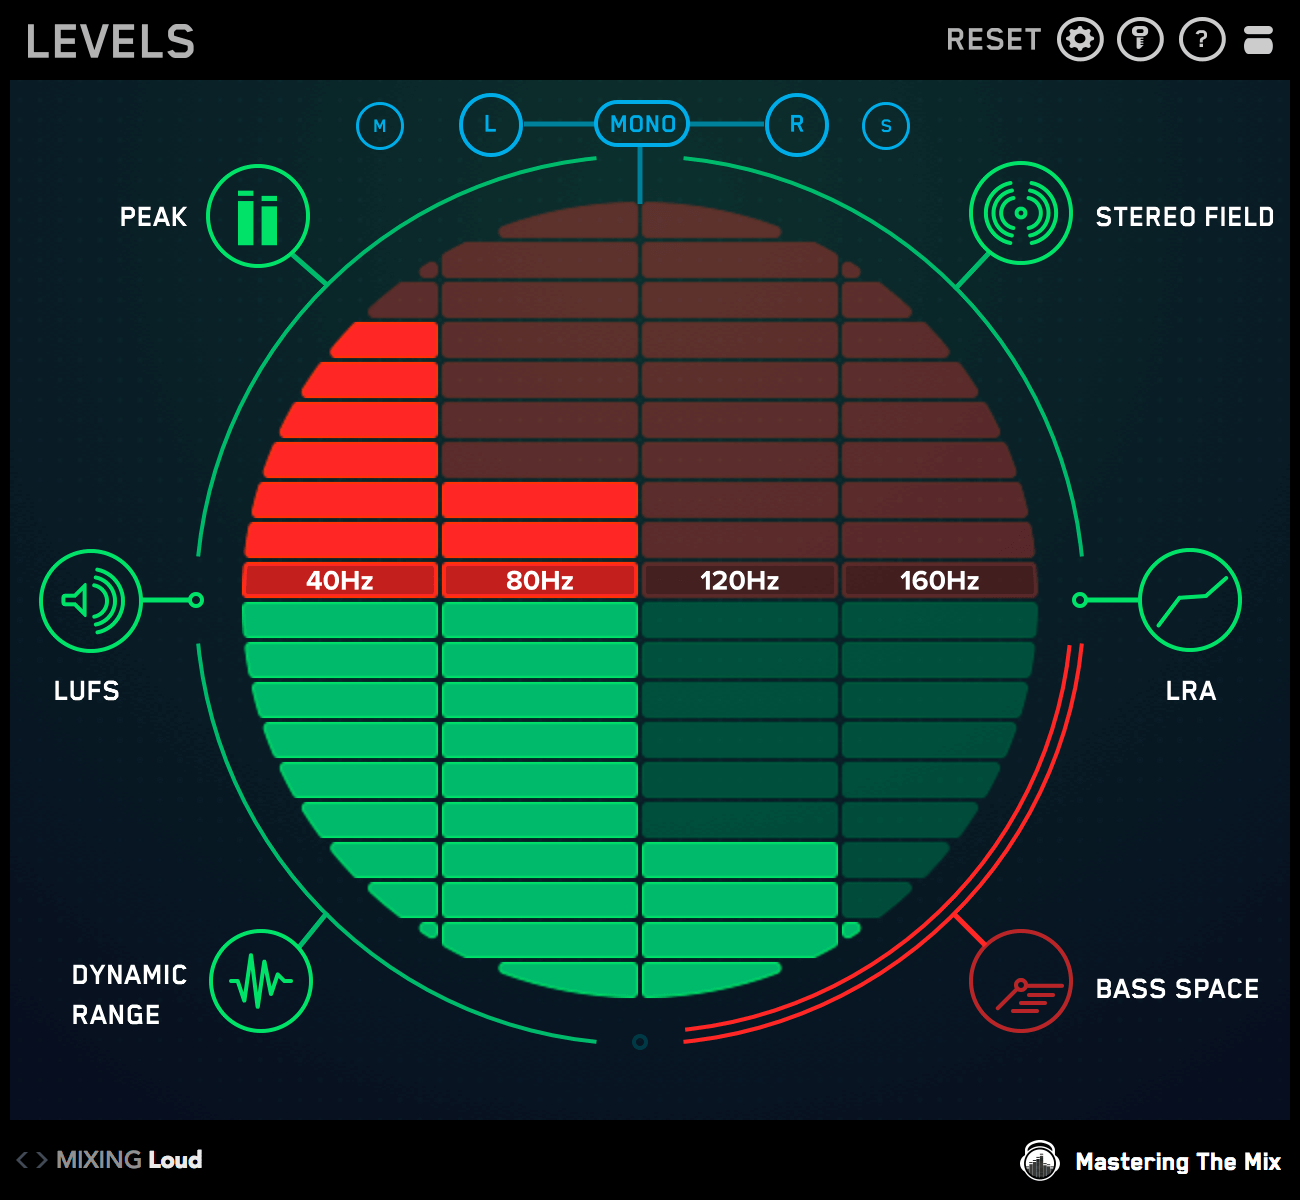 Bass Space LEVELS